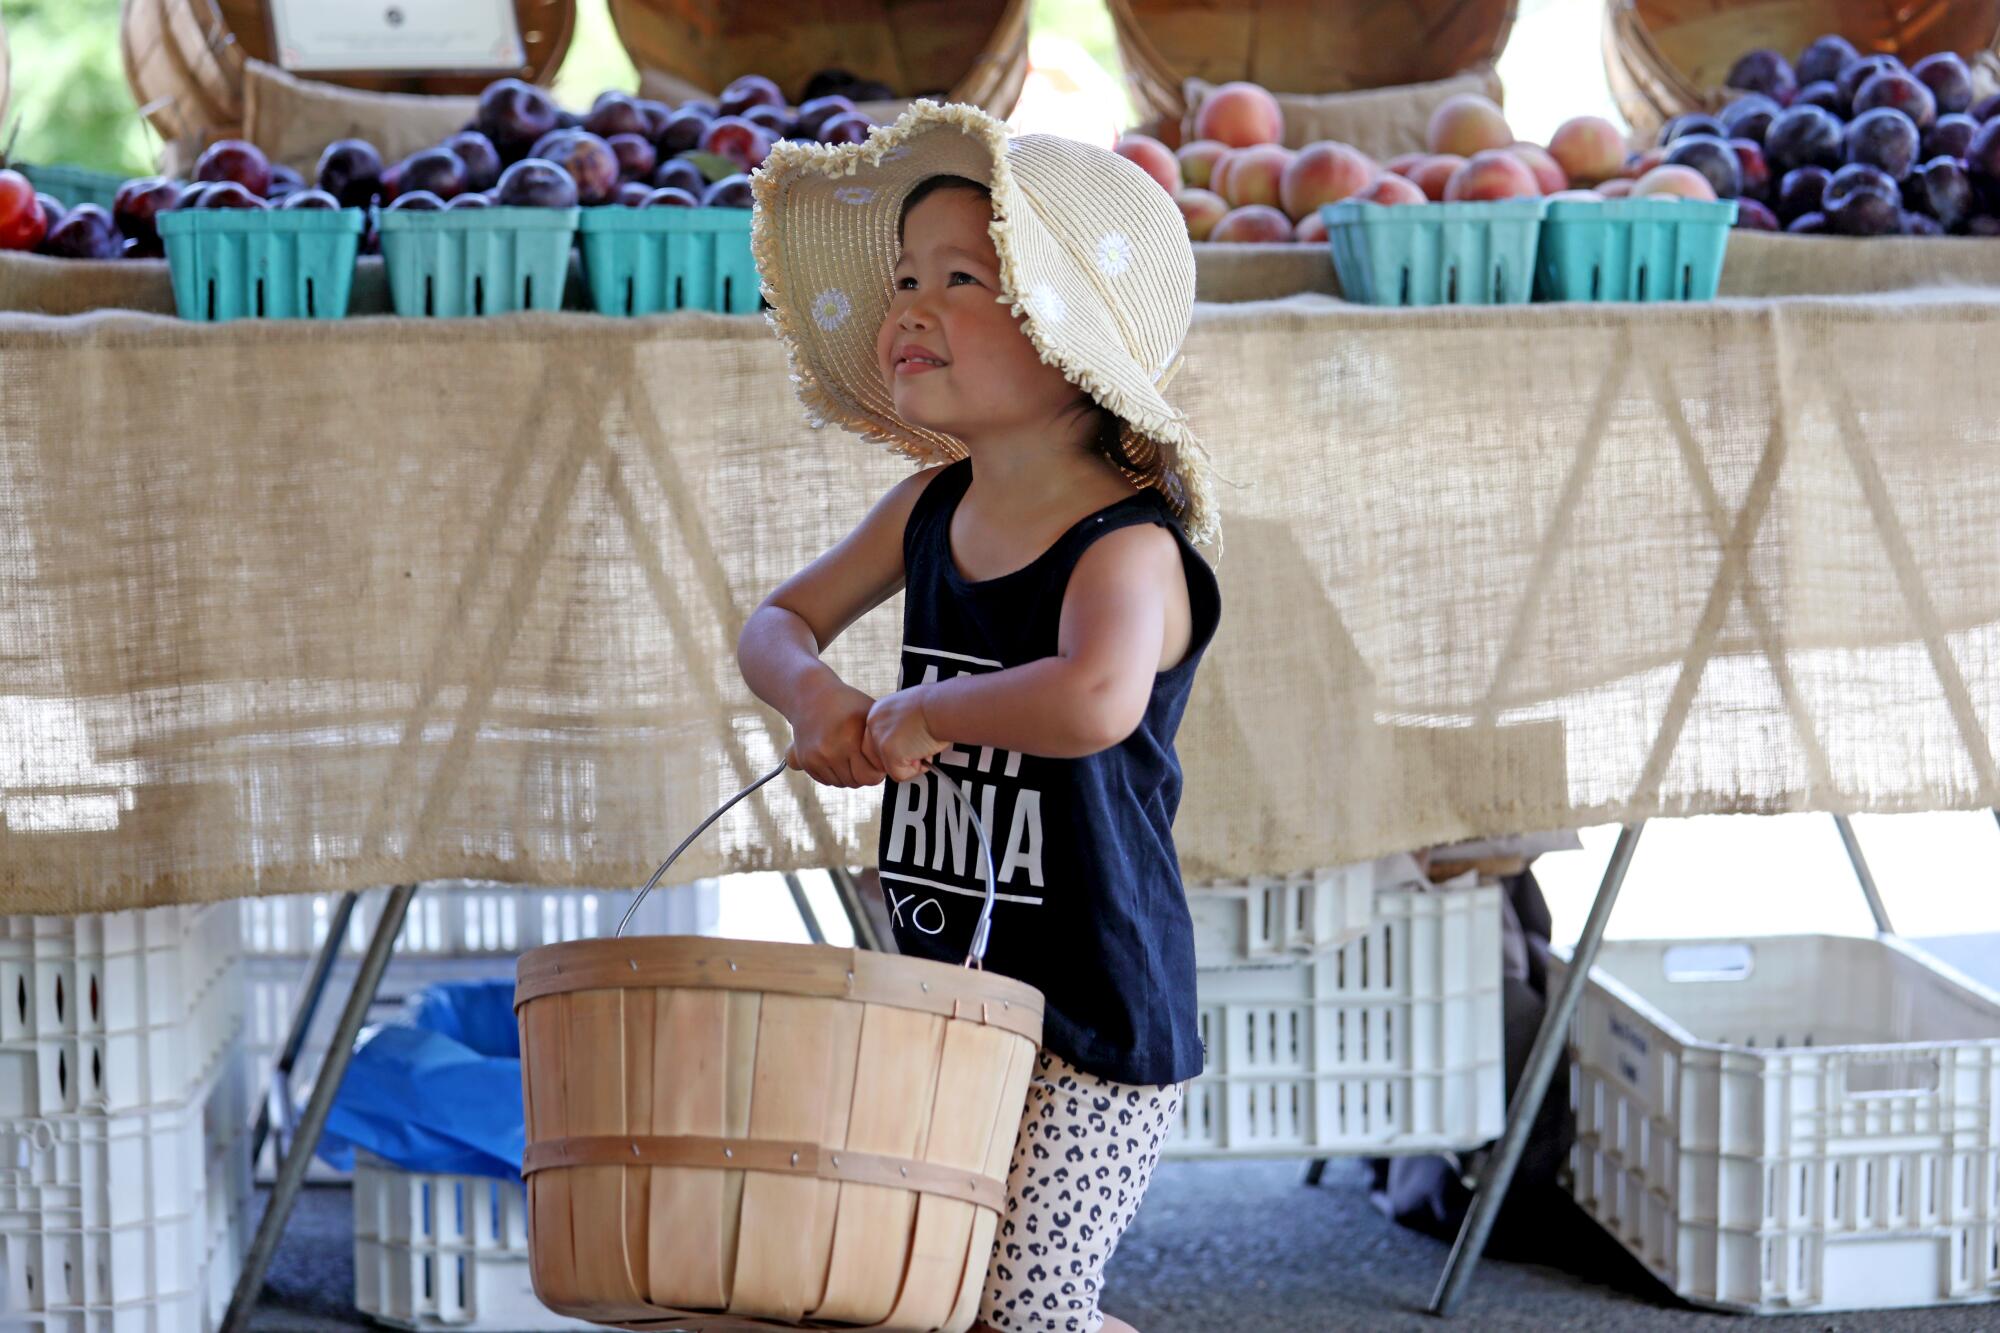 Ellis Cabie, 2, helps her mom pick out fruit at the Farmers Market in Irvine Regional Park on Tuesday.